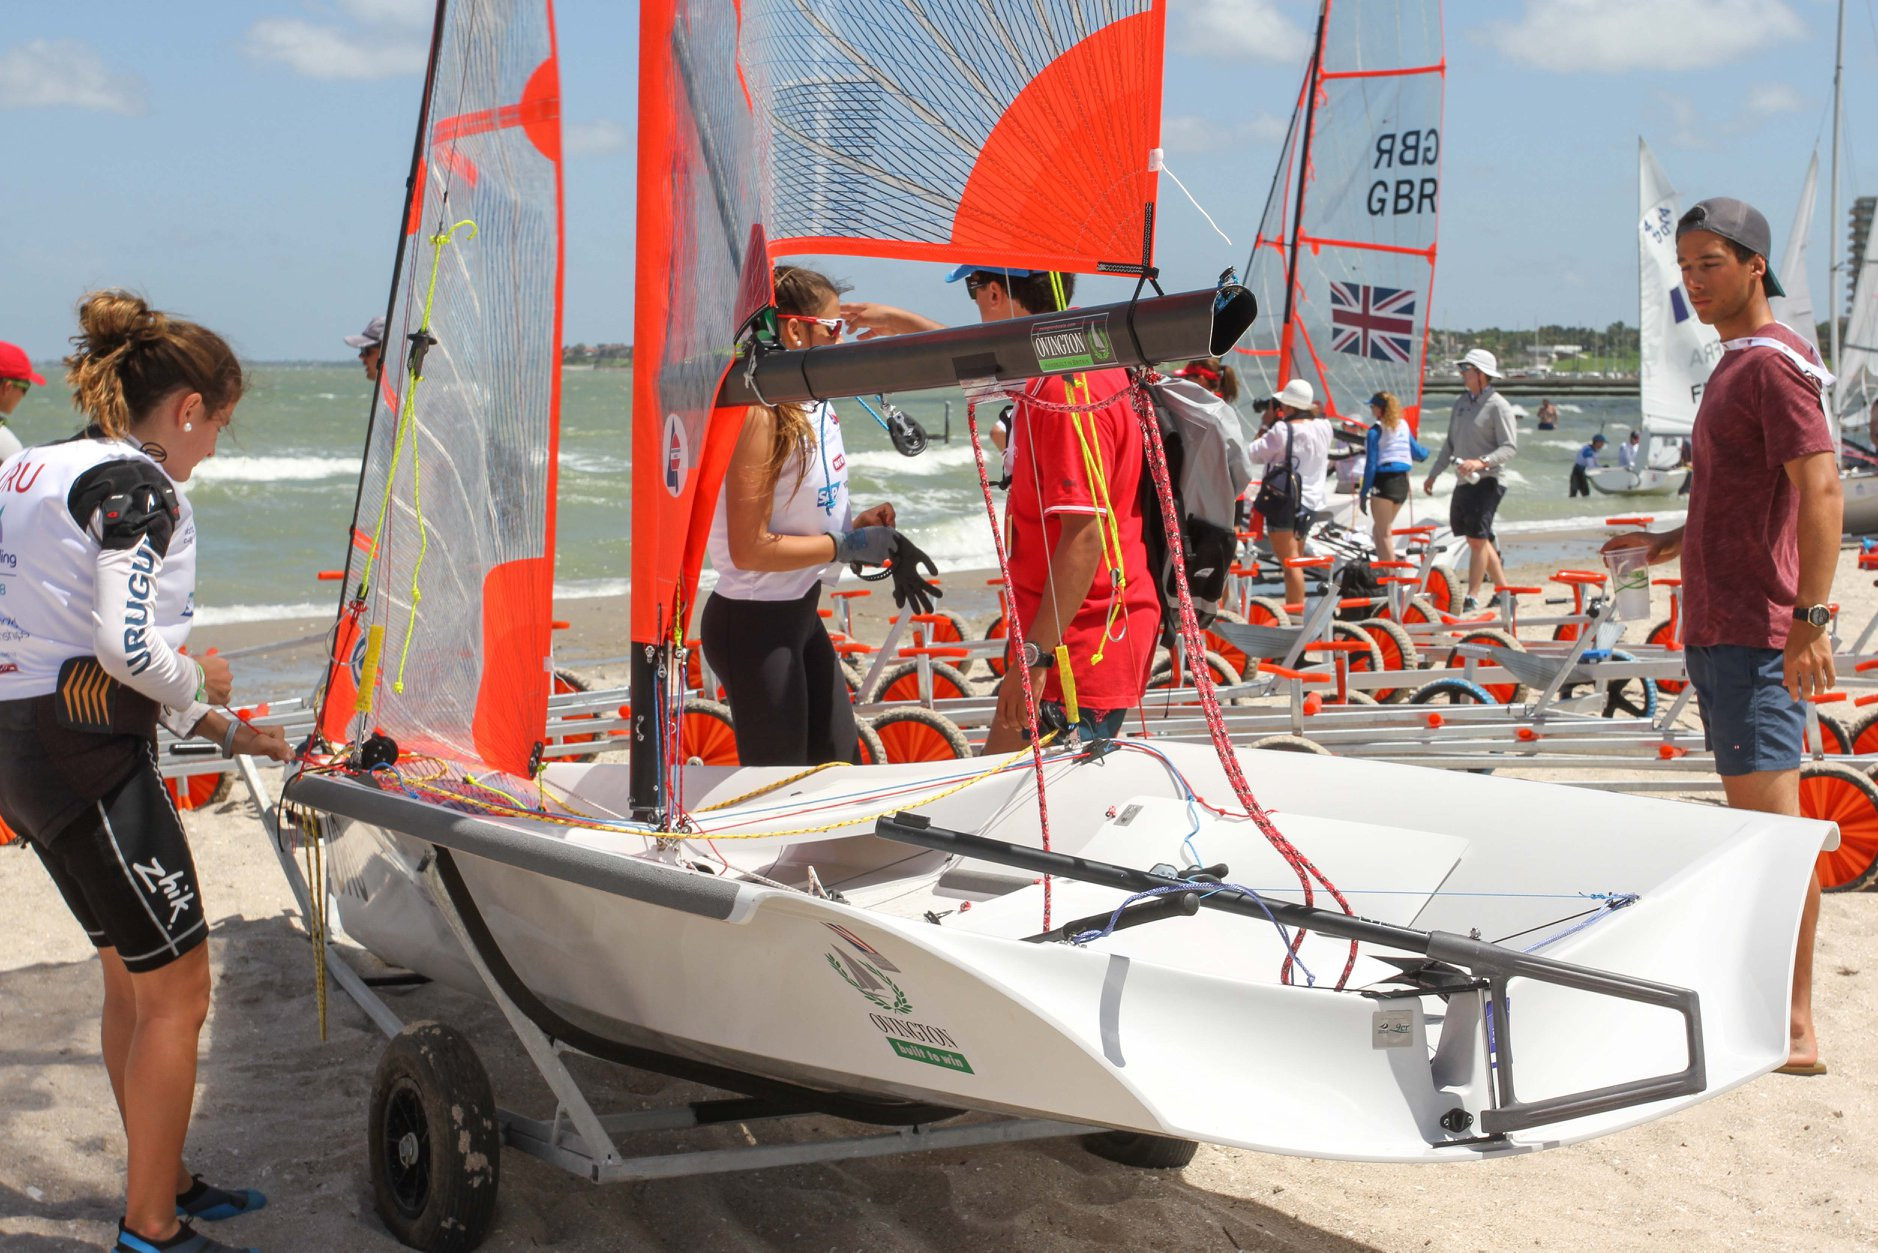 Youth Sailing World Championships to begin in Texas